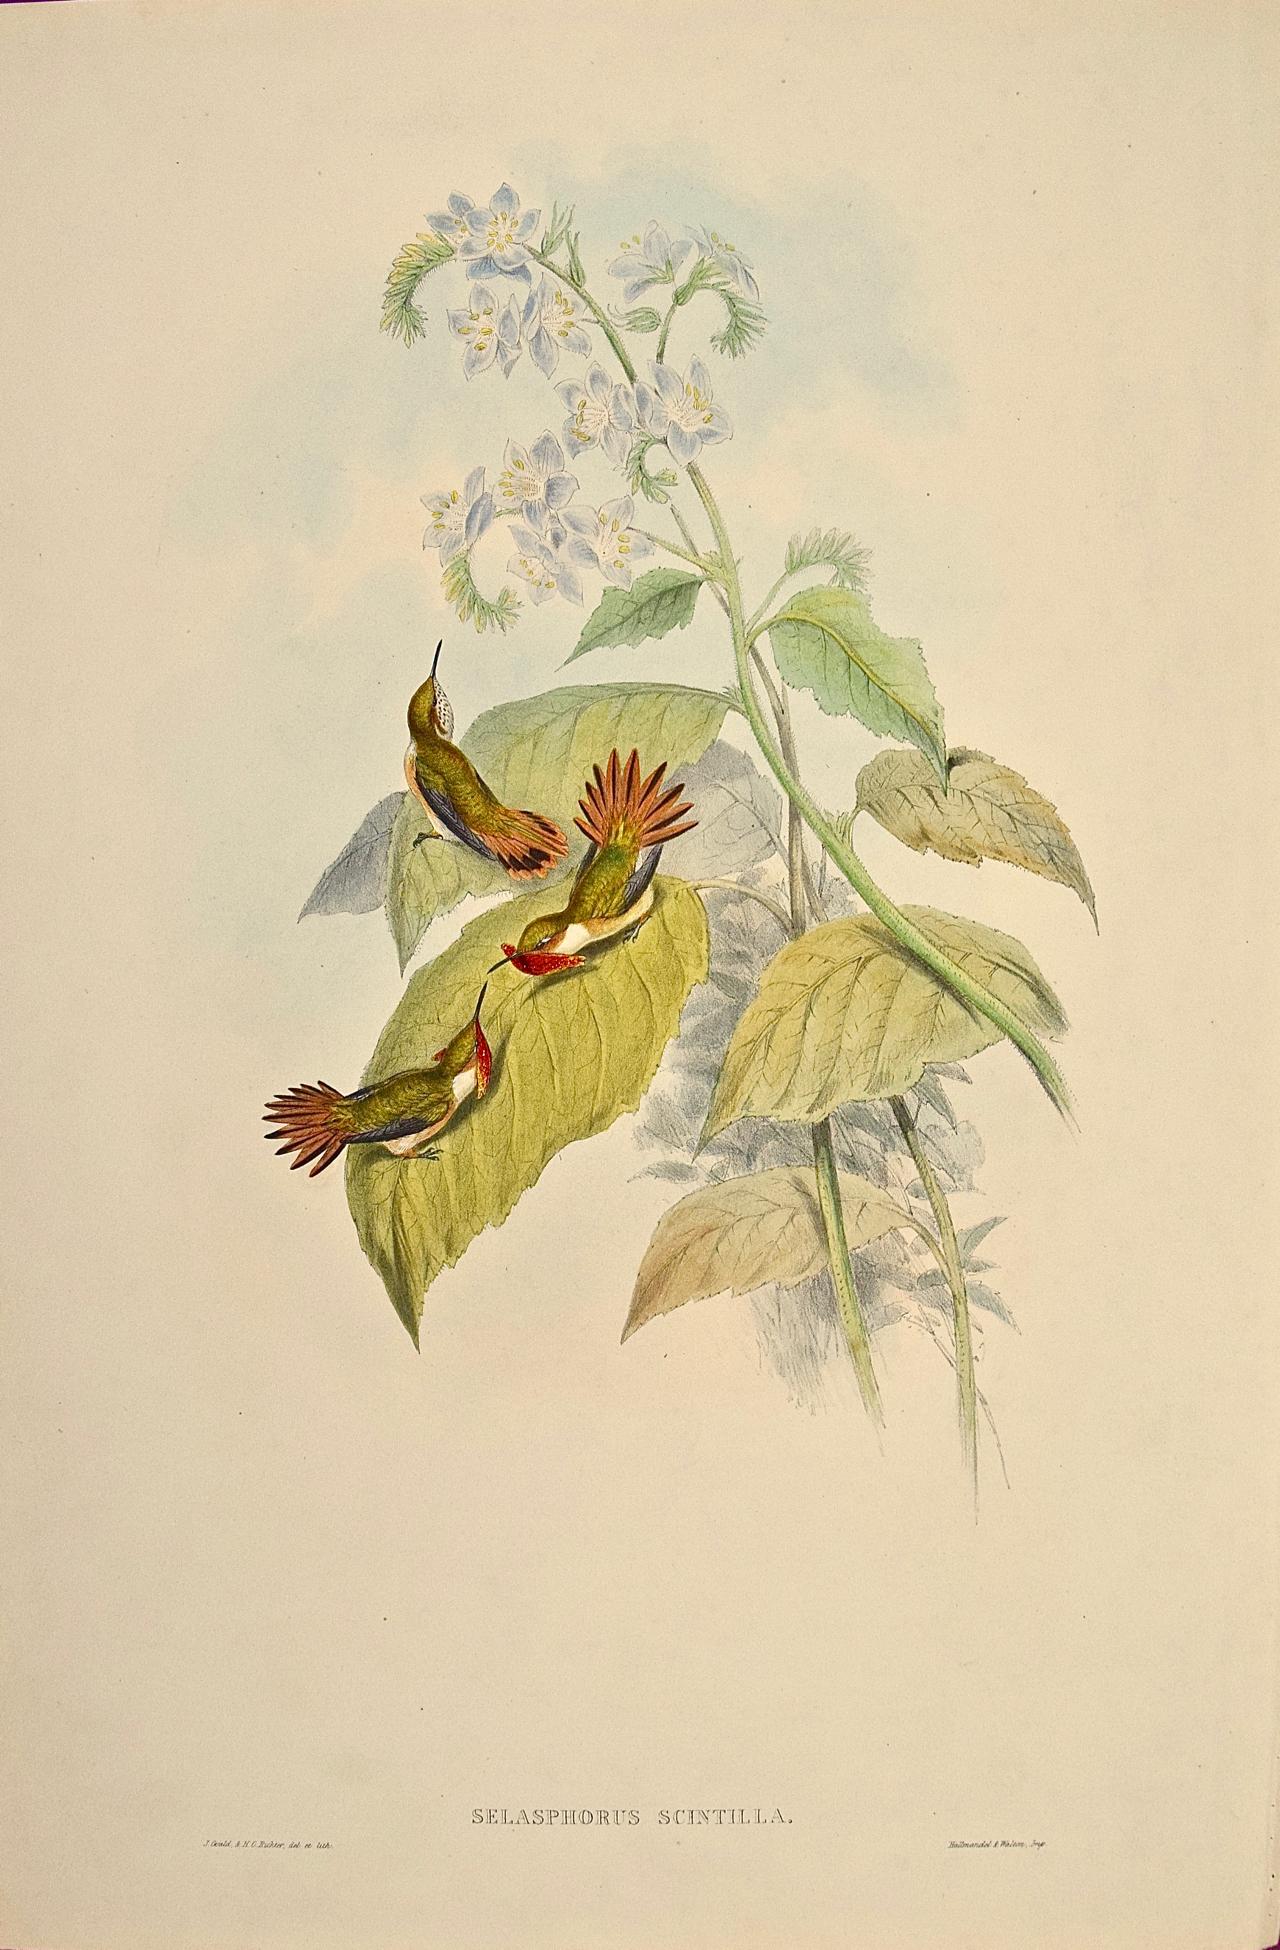 John Gould and Henry Constantine Richter Animal Print - Flame-bearer Hummingbirds: A 19th C. Gould Hand-colored "Selasphorus Scintilla"